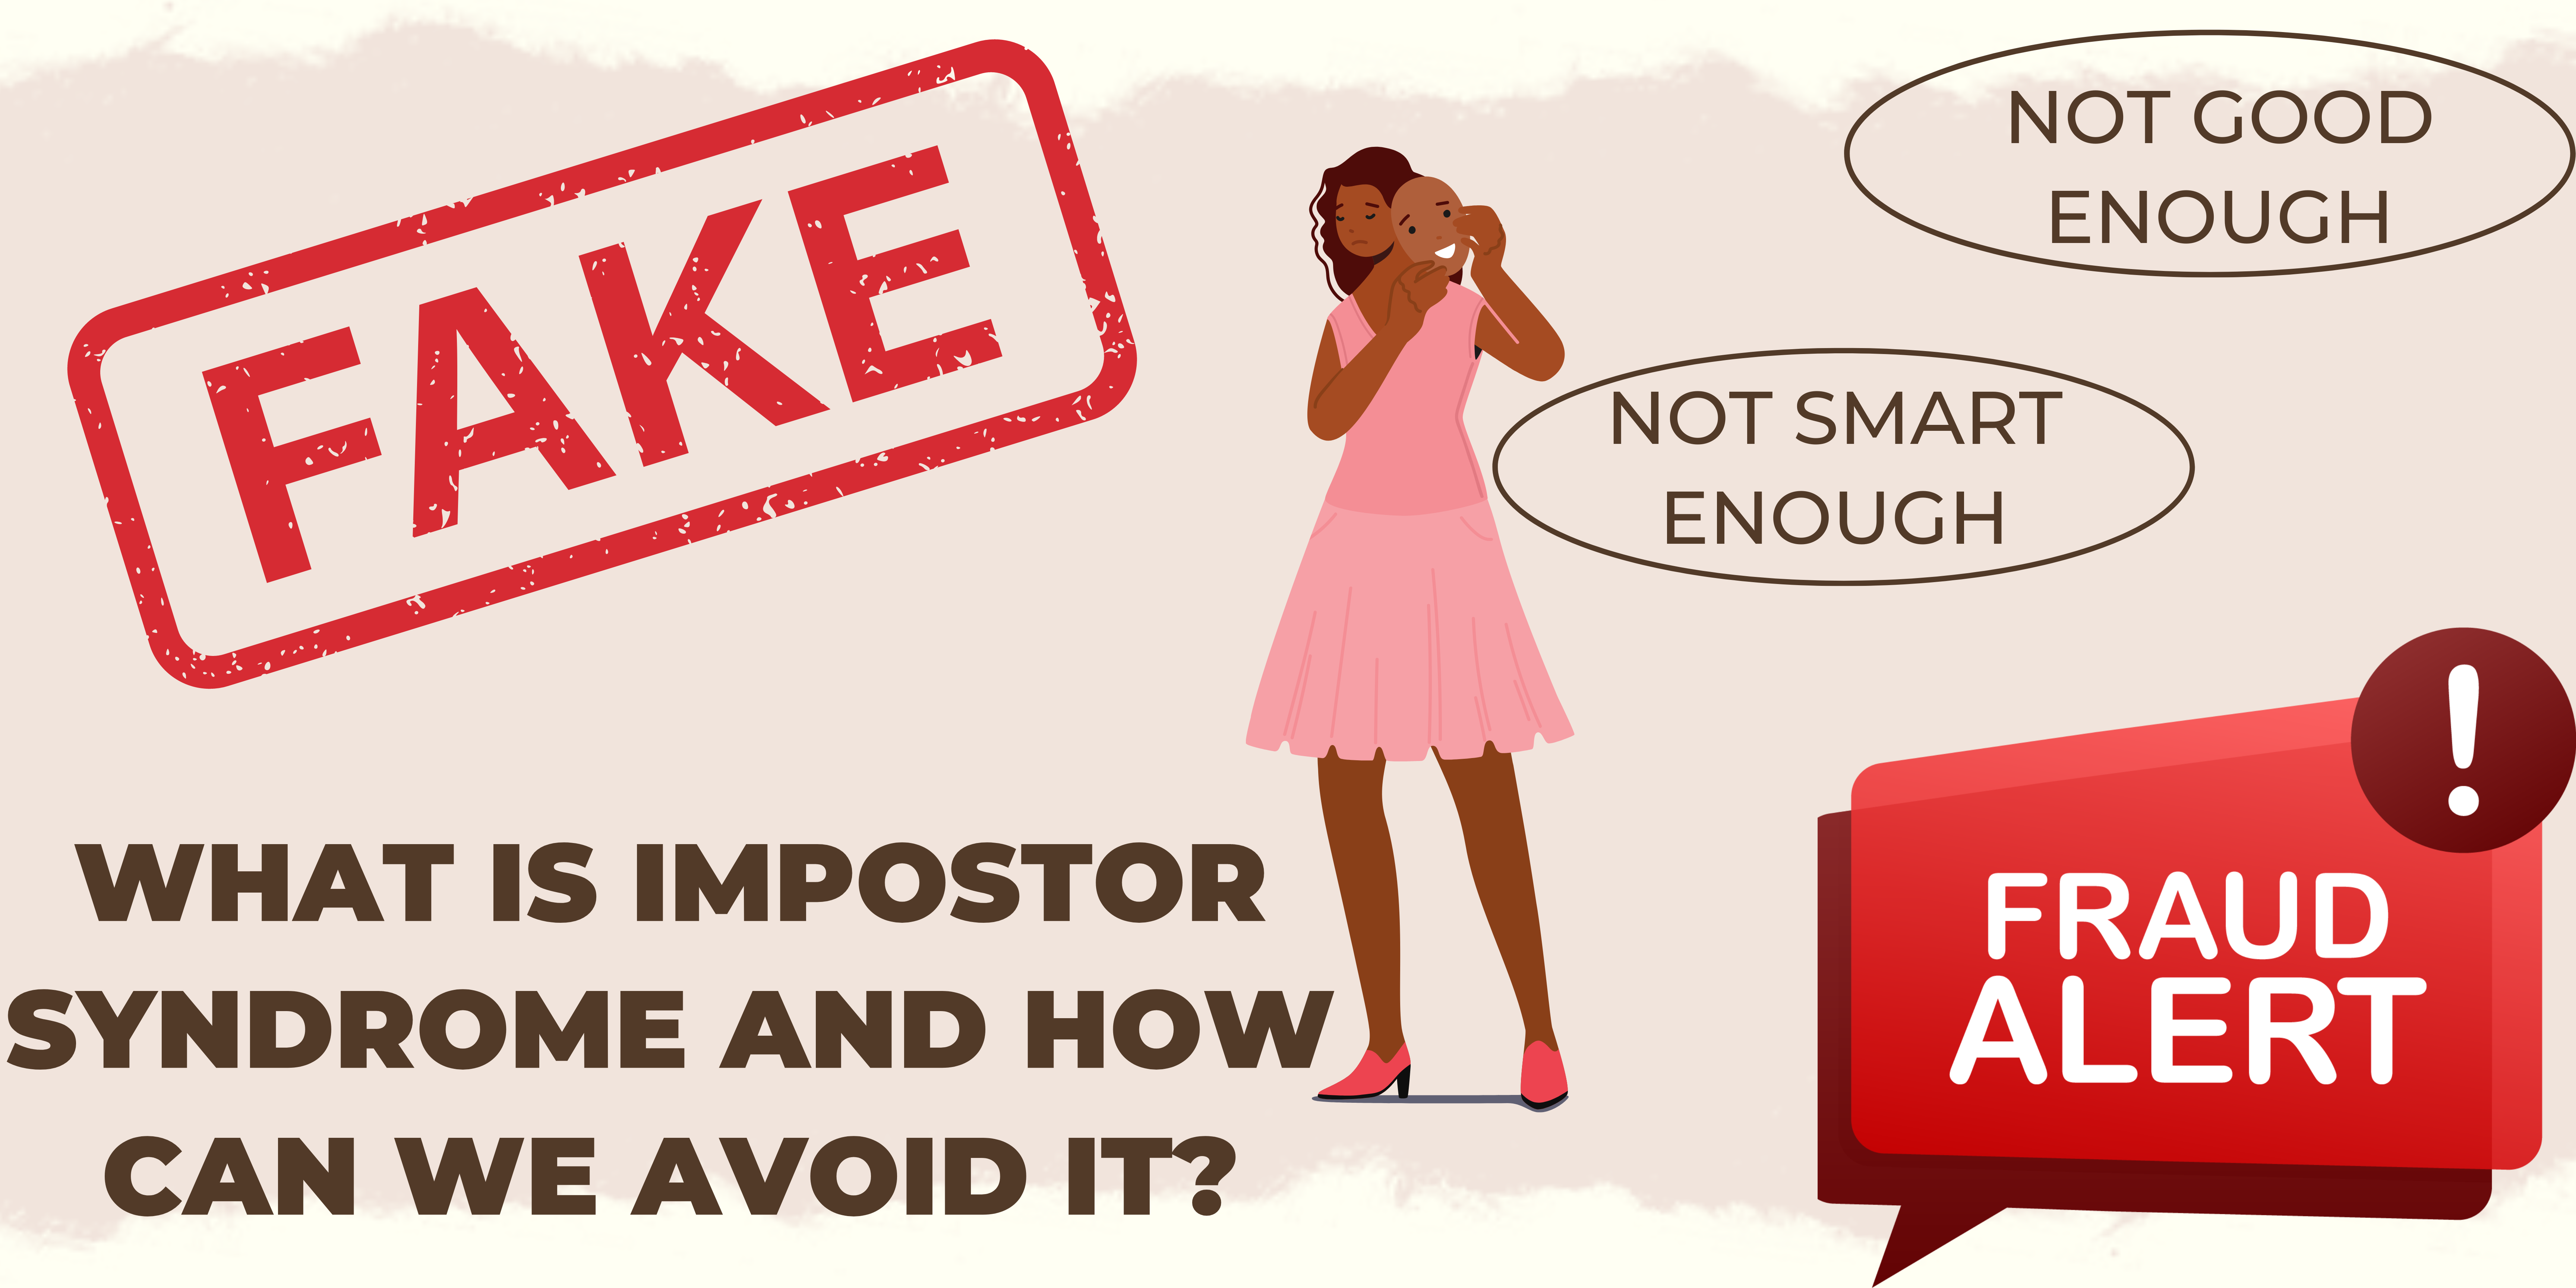 What is Impostor Syndrome and how can we avoid it? Woman holding mask of her face. 